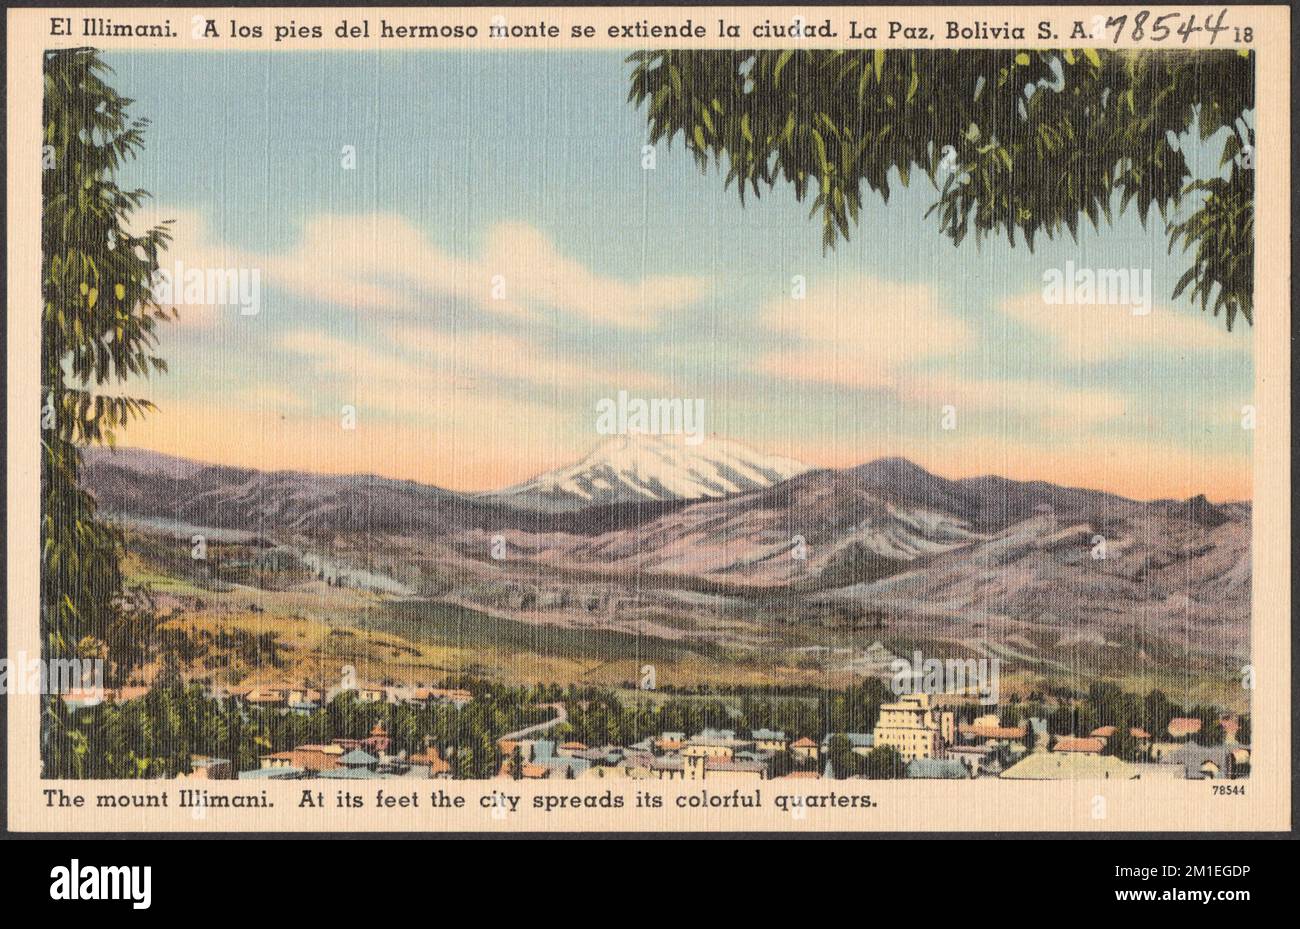 El Illimani. A los pies de hermoso monte se extiende la ciudad. La Paz, Bolivia, S. A. - The mount Illimani. At its feet the city spreads its colorful quarters , Mountains, Cities & towns, Tichnor Brothers Collection, postcards of the United States Stock Photo